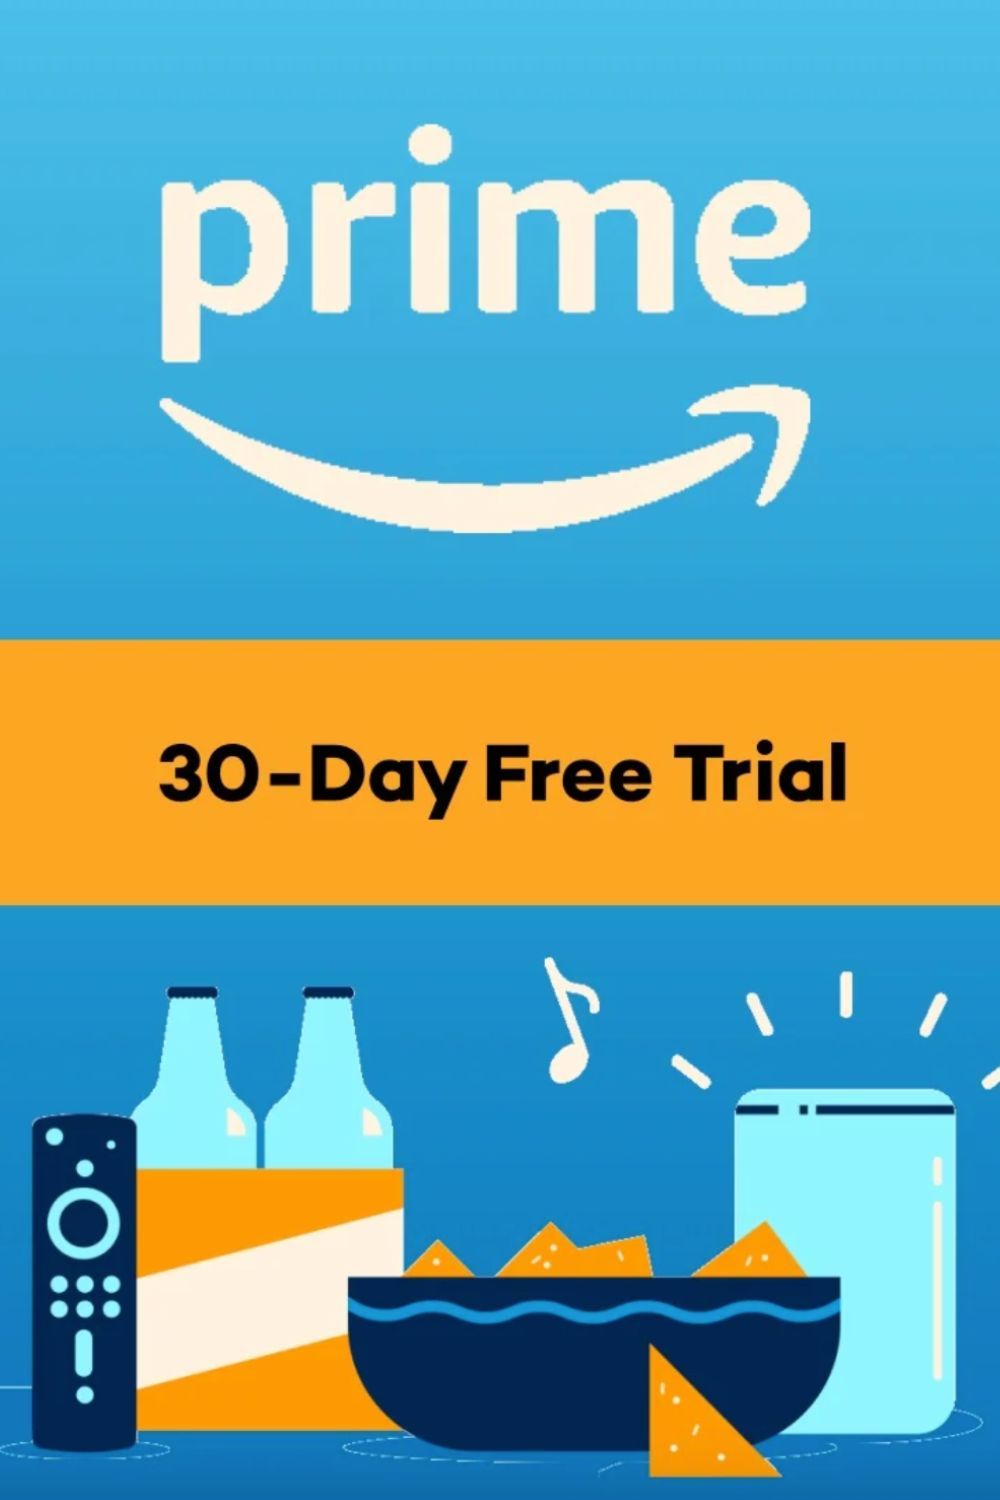 Free trial image for Amazon Prime